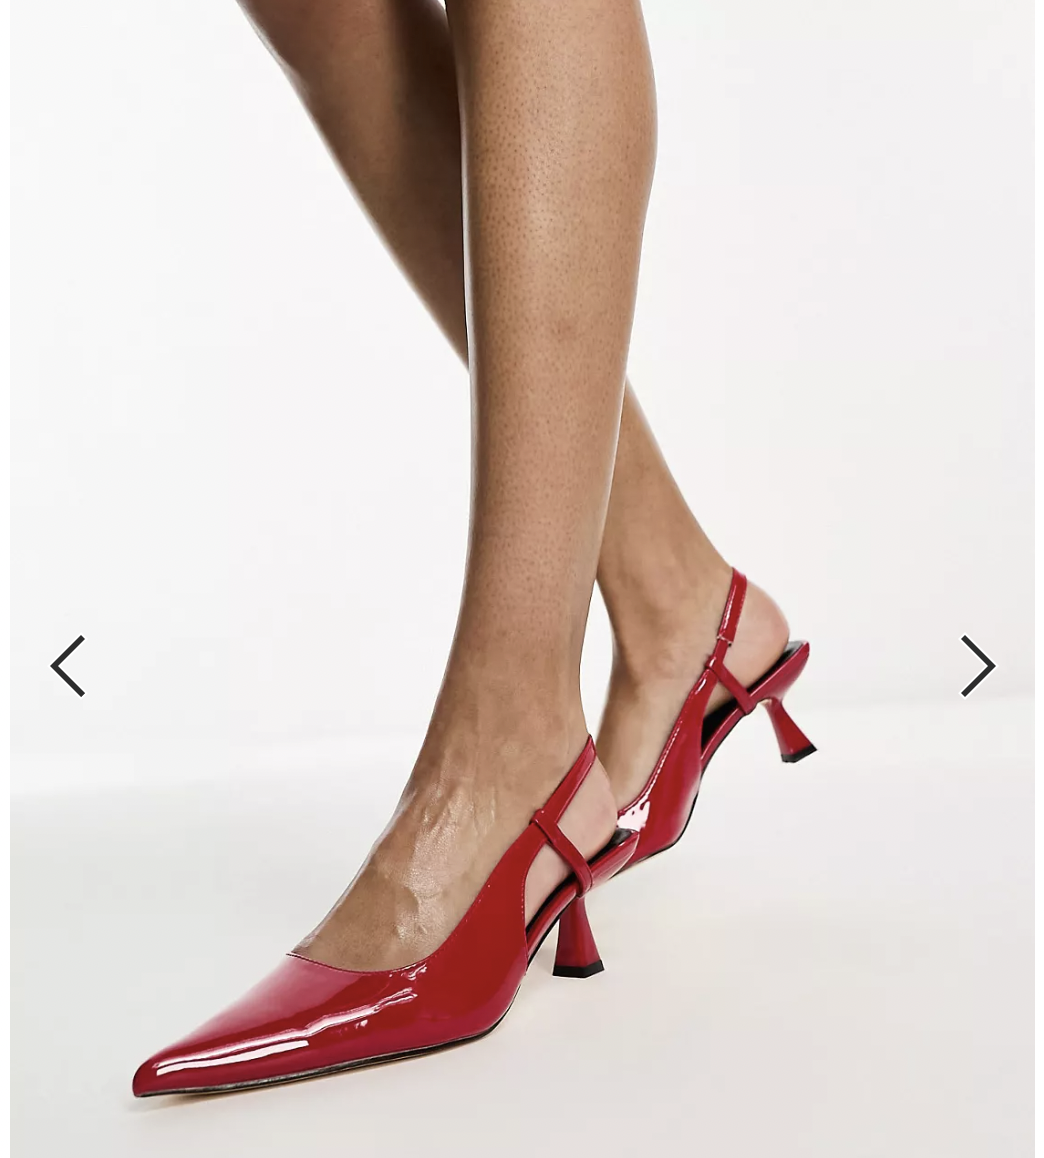 Glamorous slingback mid stiletto heels in red